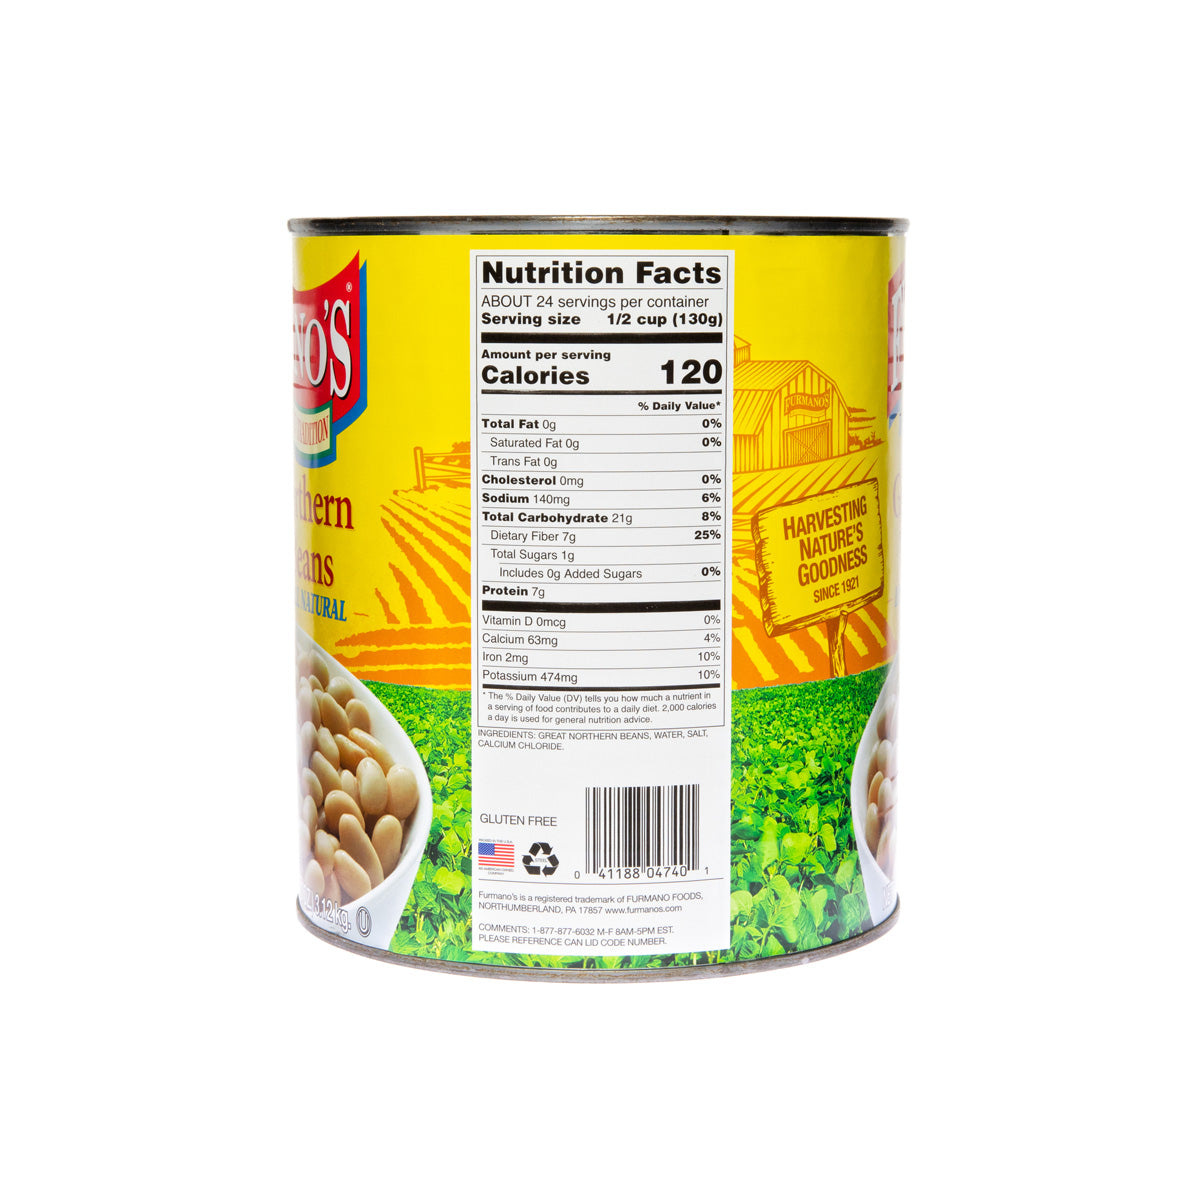 Furmano'S Canned Great Northern Beans 110 OZ